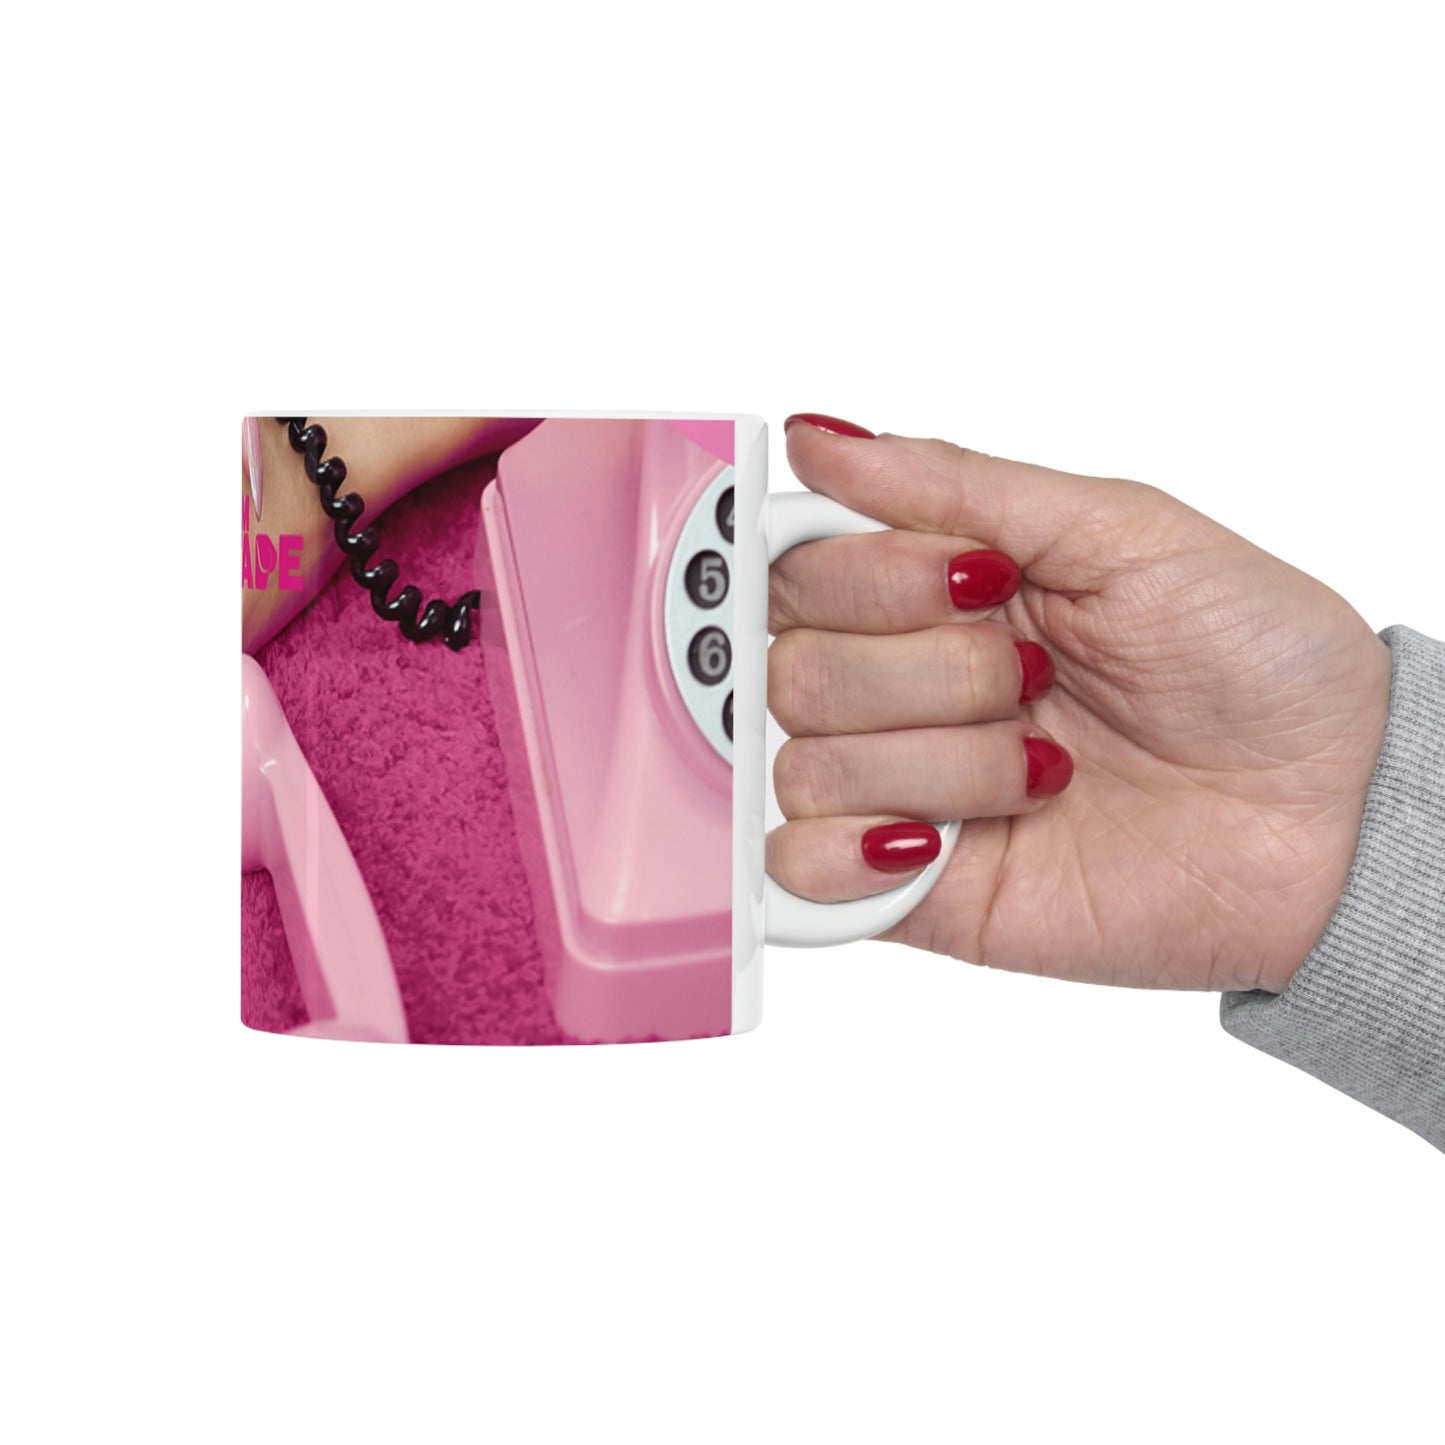 Taza cerámica 11 oz "Just call me baby" Promocionales FemTape